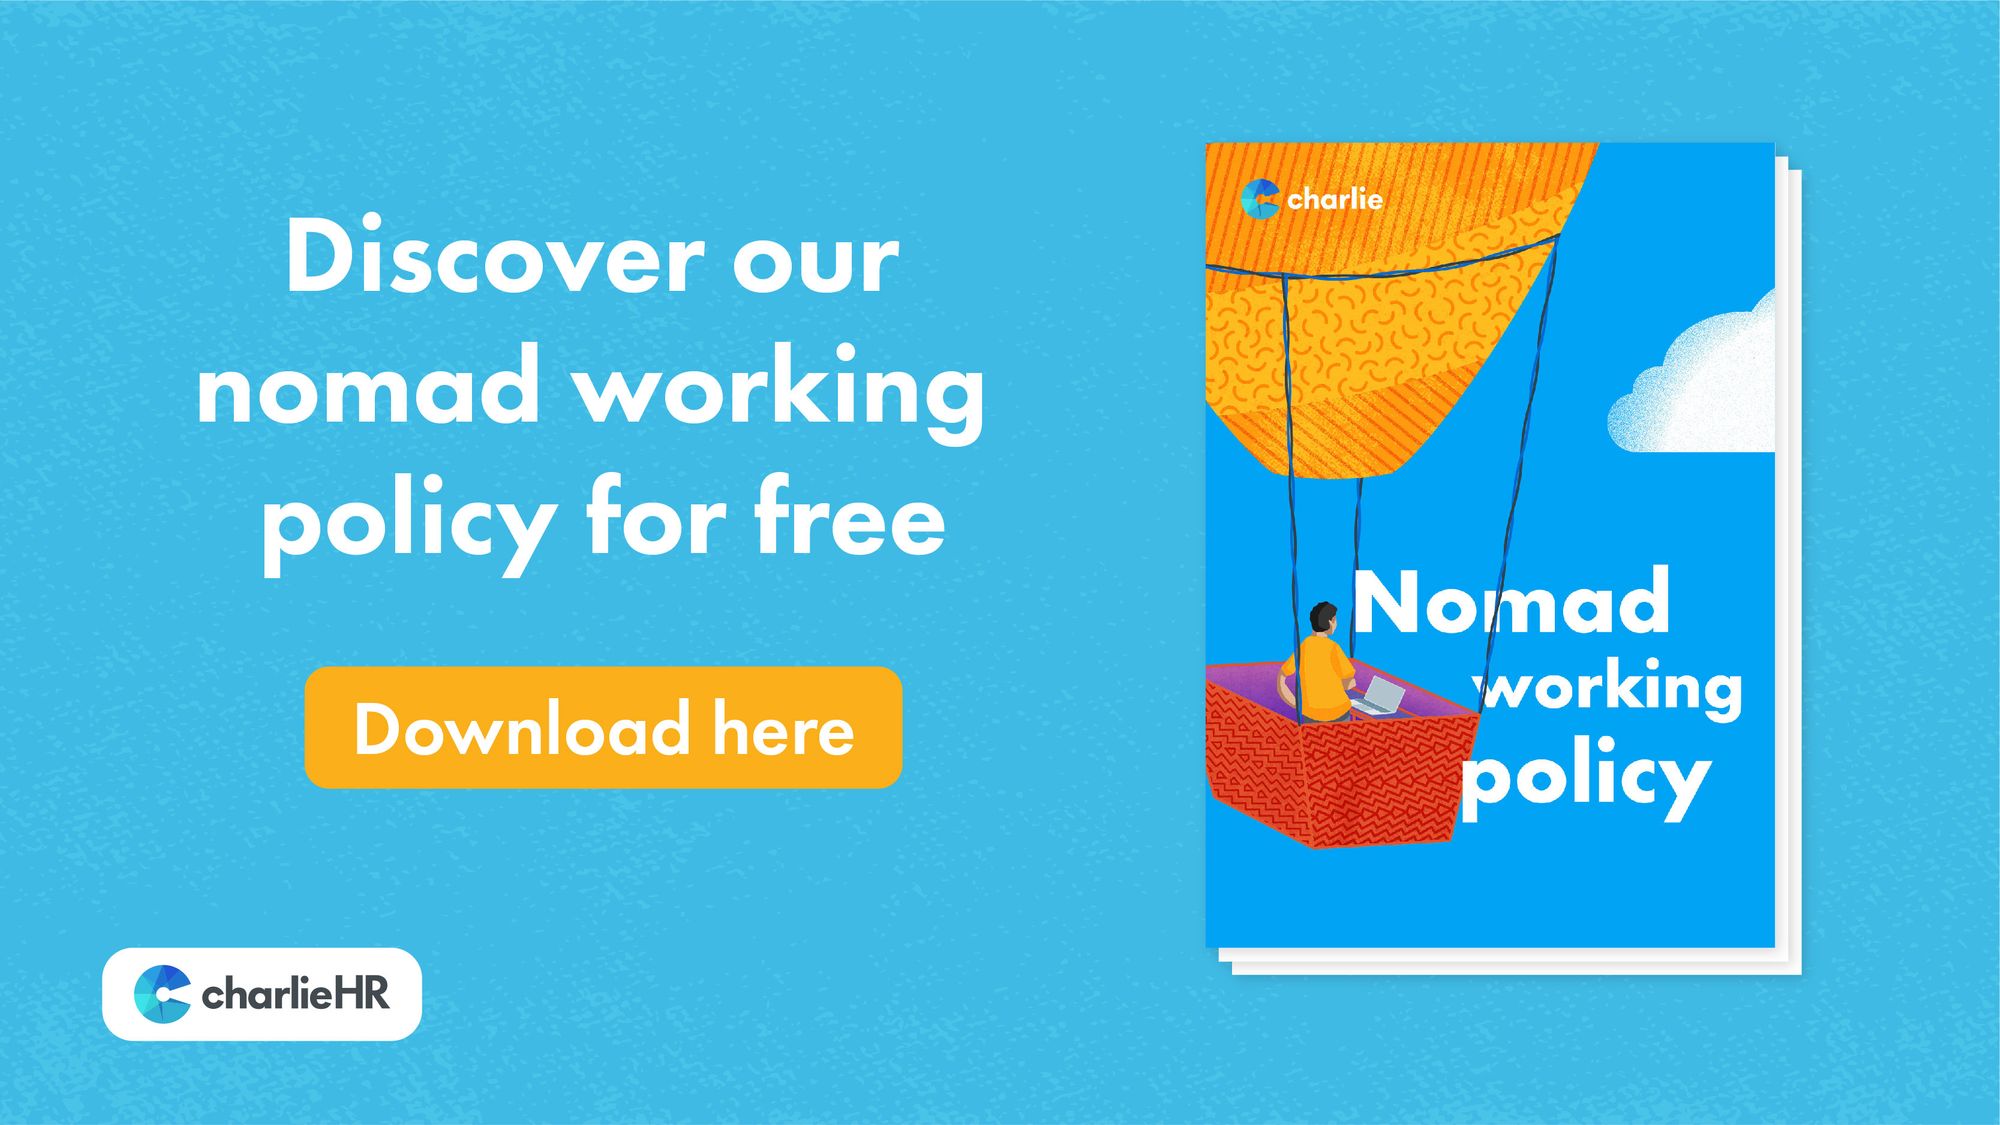 Click here to download our nomad working policy